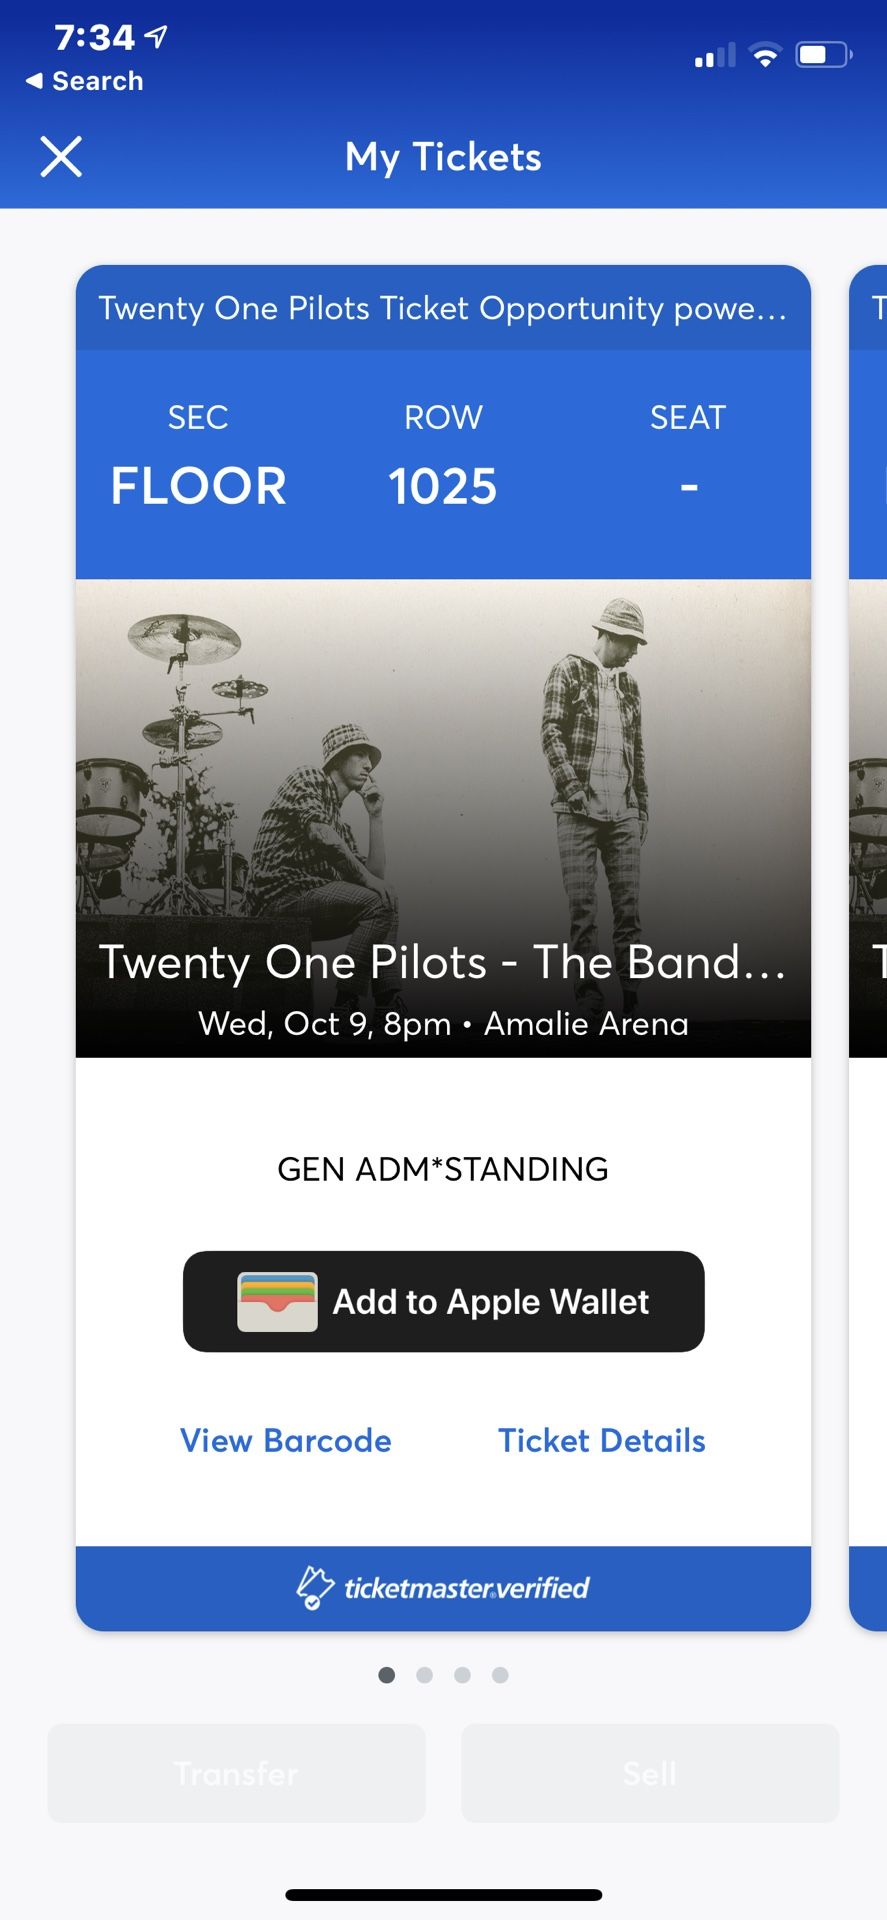 Twenty One Pilots General Admission FLOOR Tickets - 1 for $150 - 2 for $250